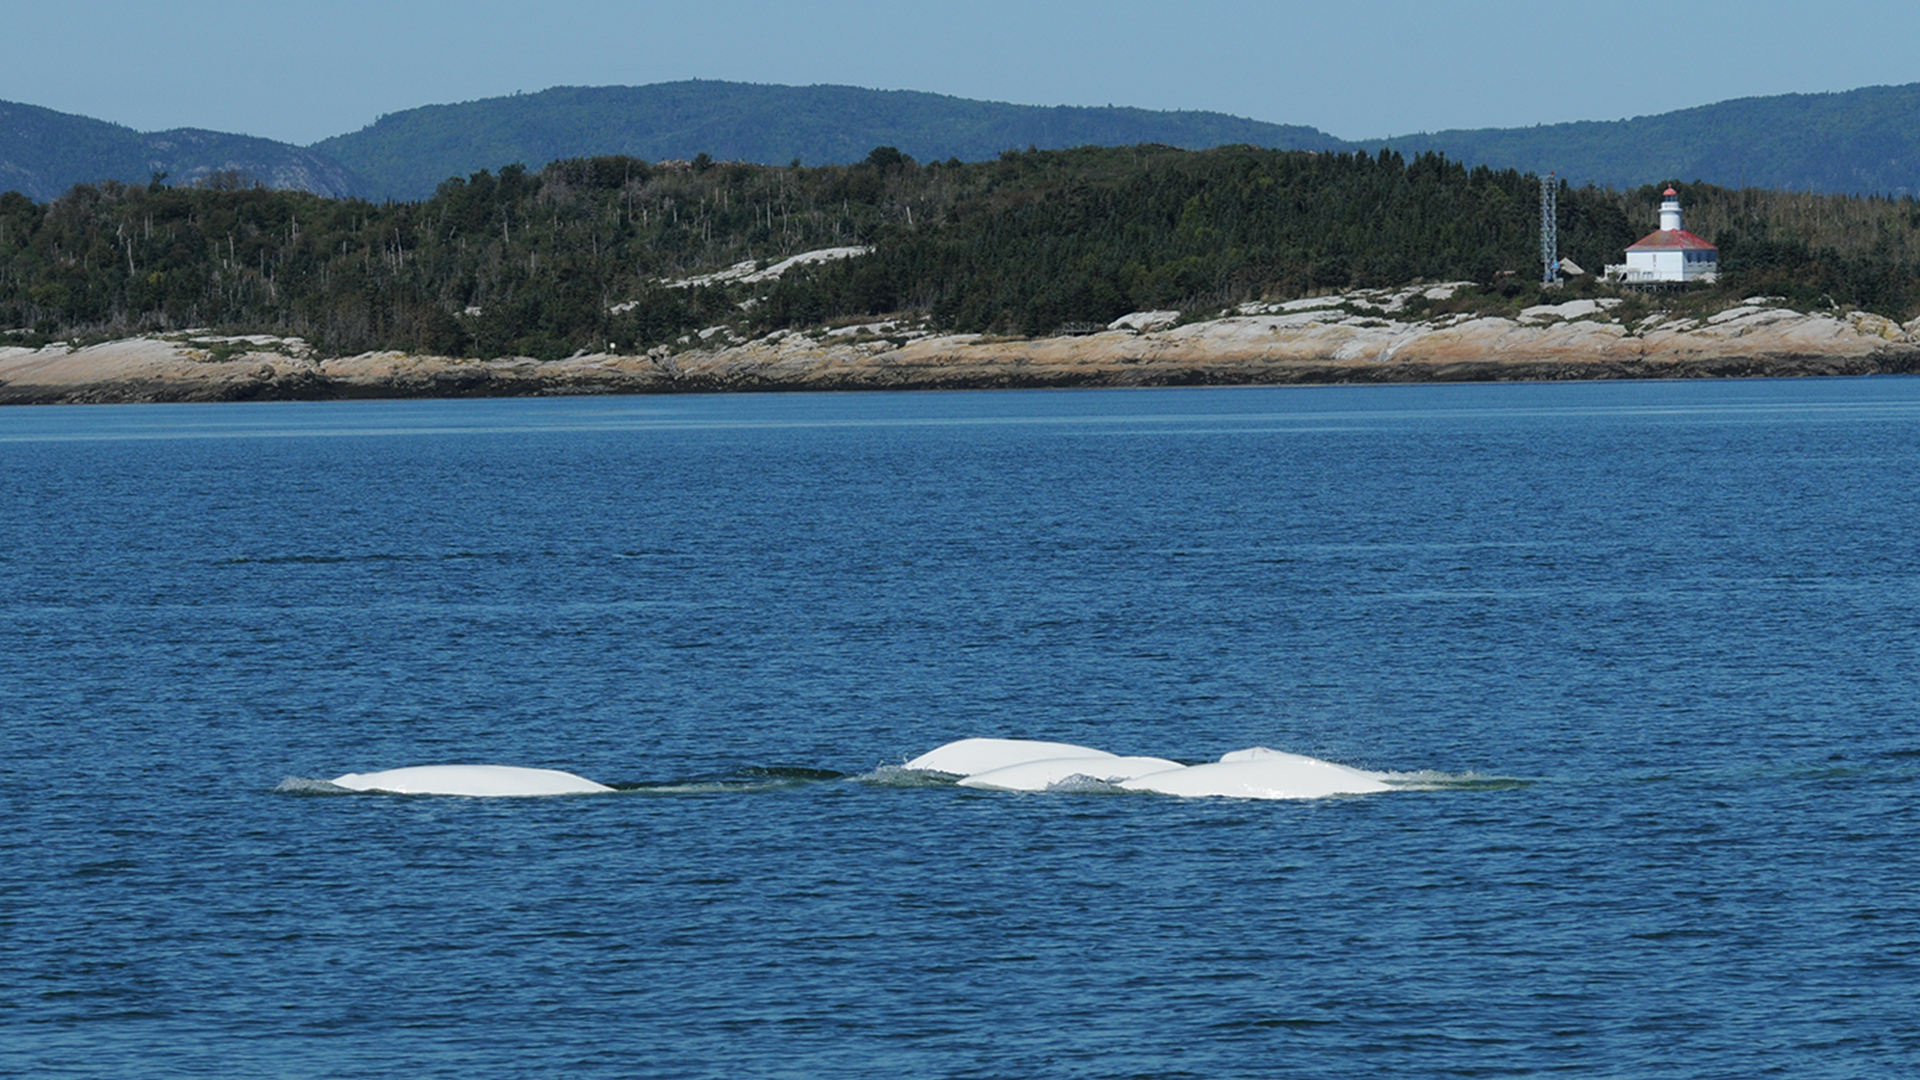 The white backs of five belugas break the surface. The rocky shoreline can be seen in the background.